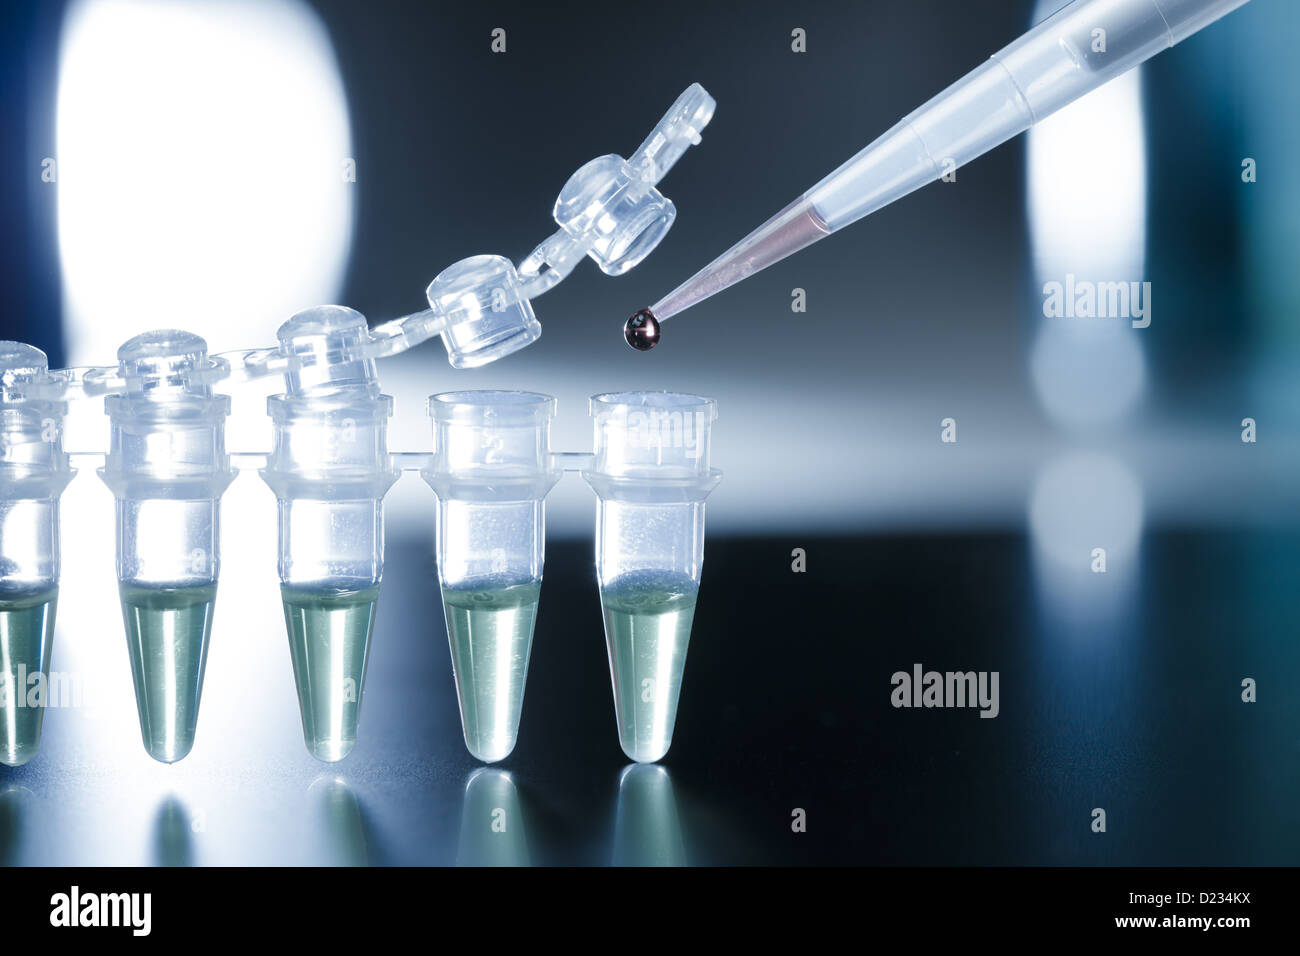 Stem cell research in the PCR strip Stock Photo